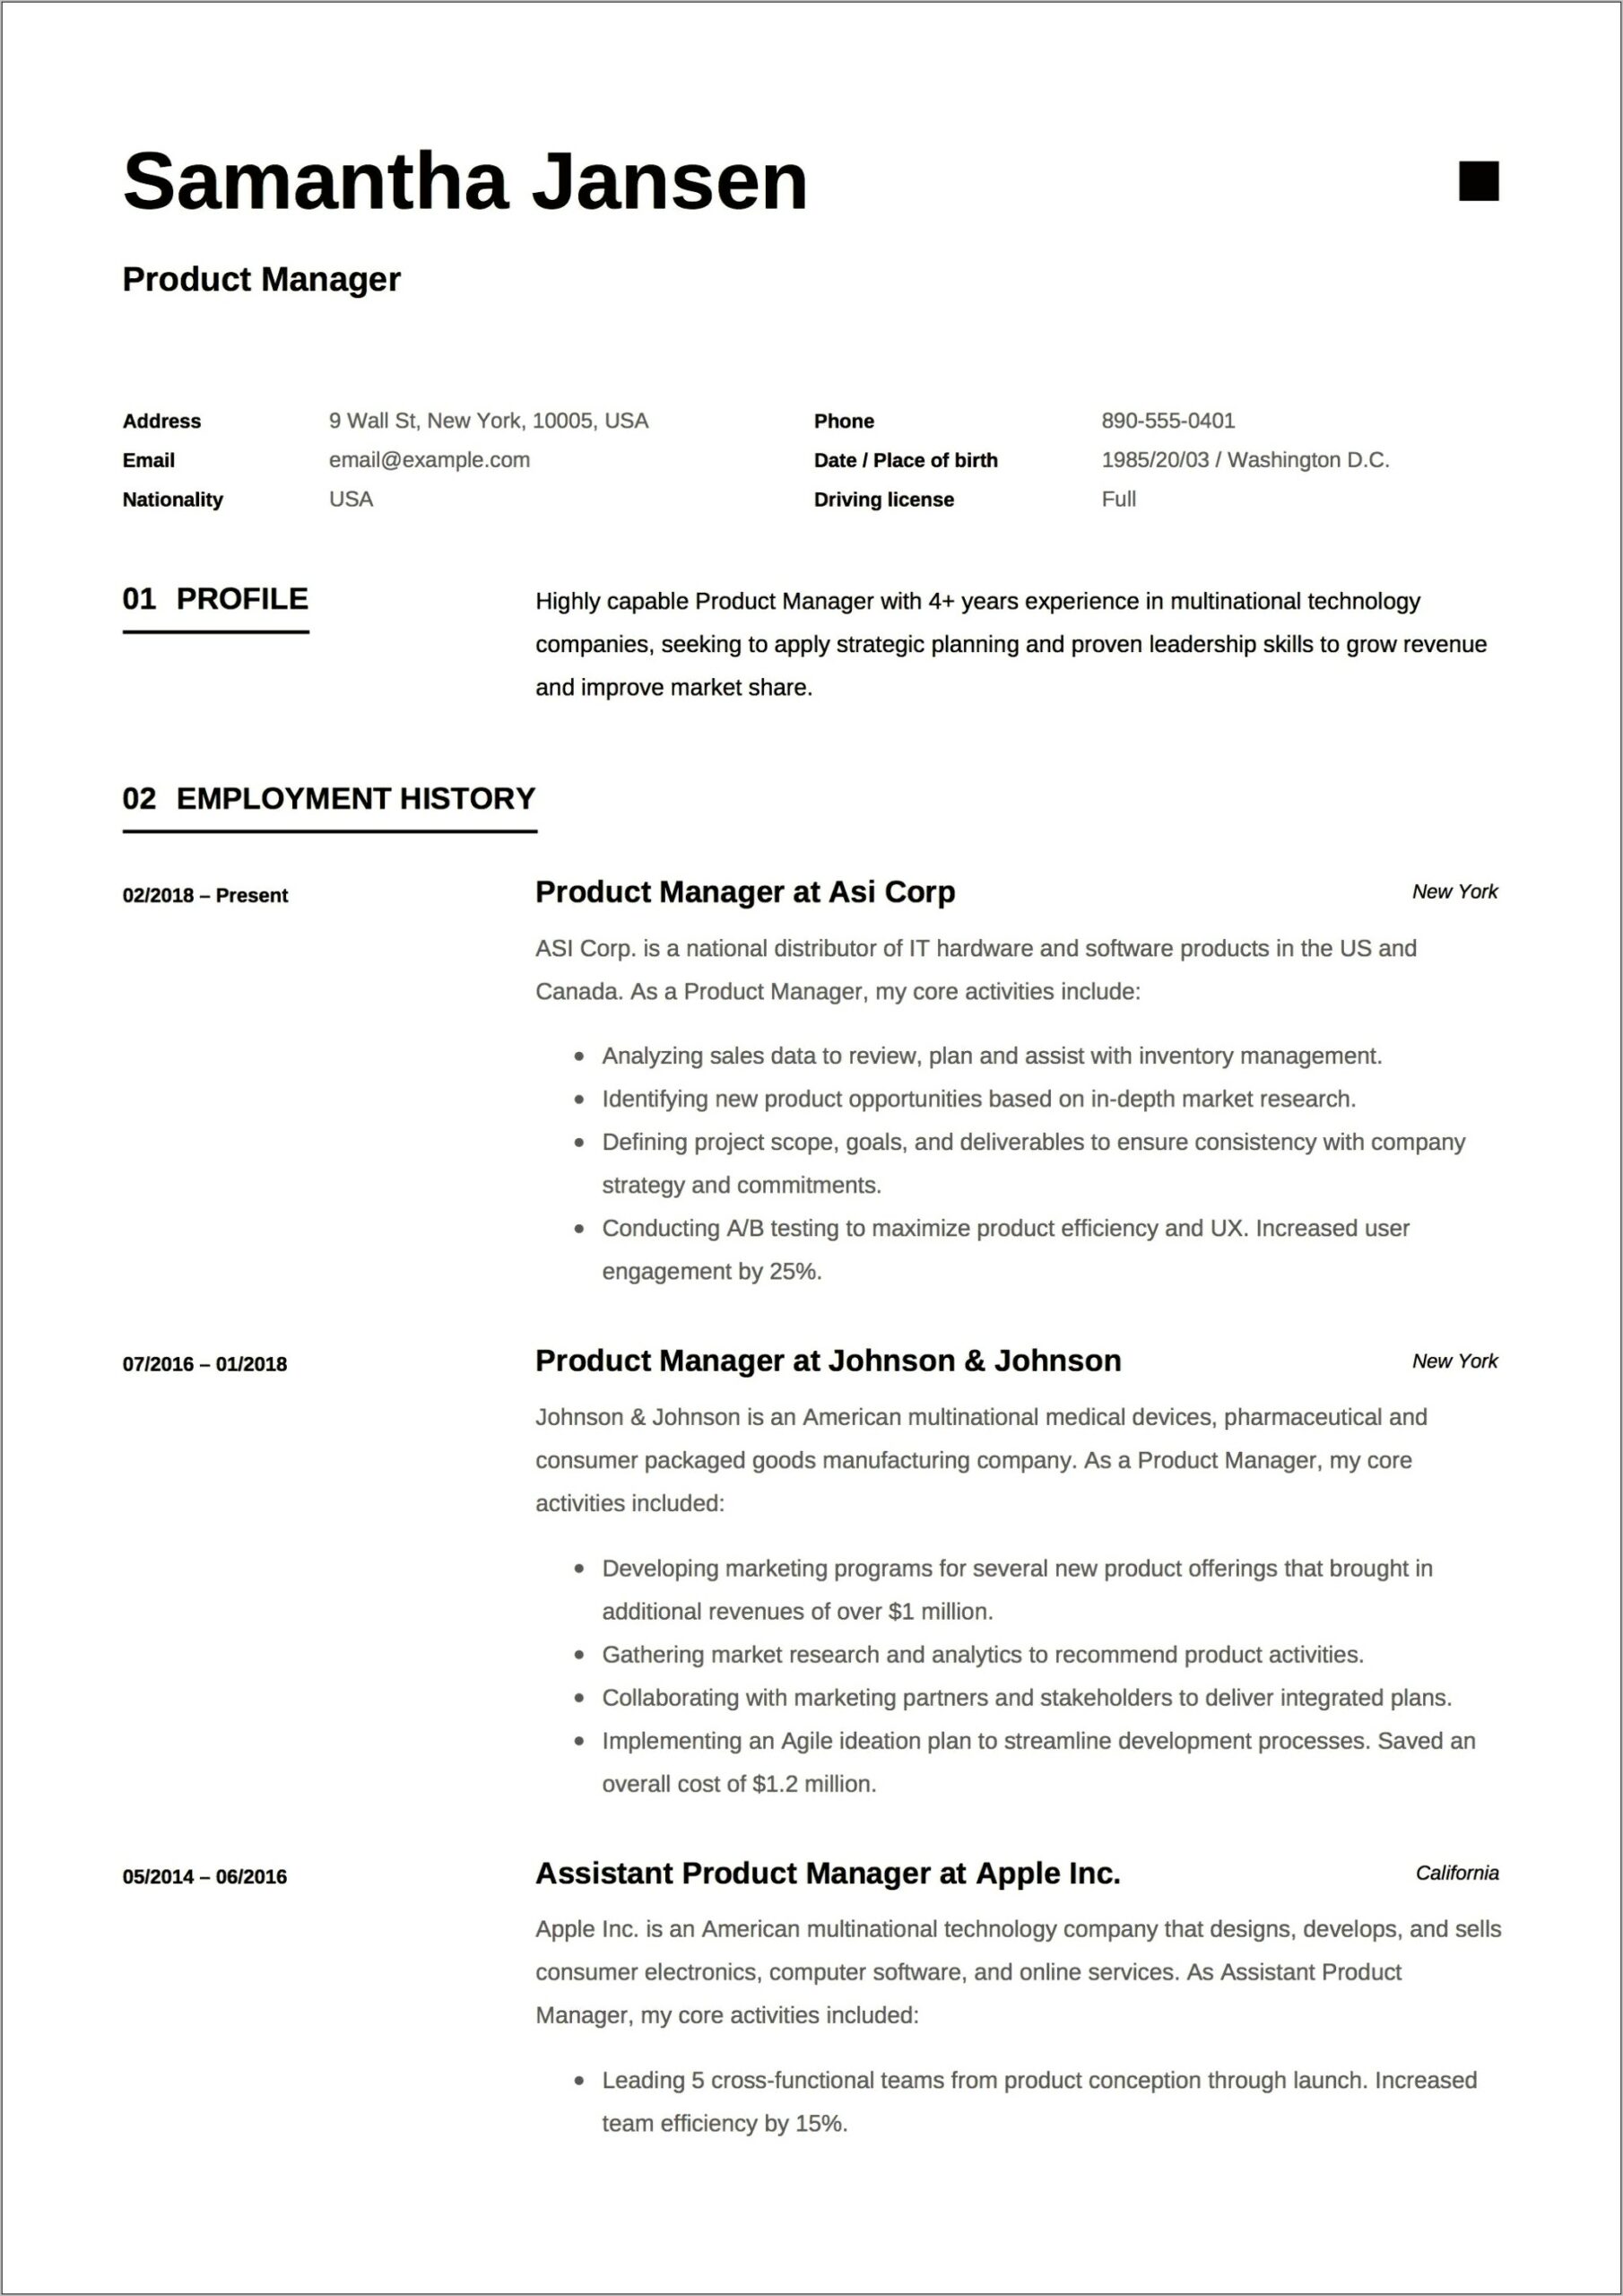 Software Product Manager Sample Resume